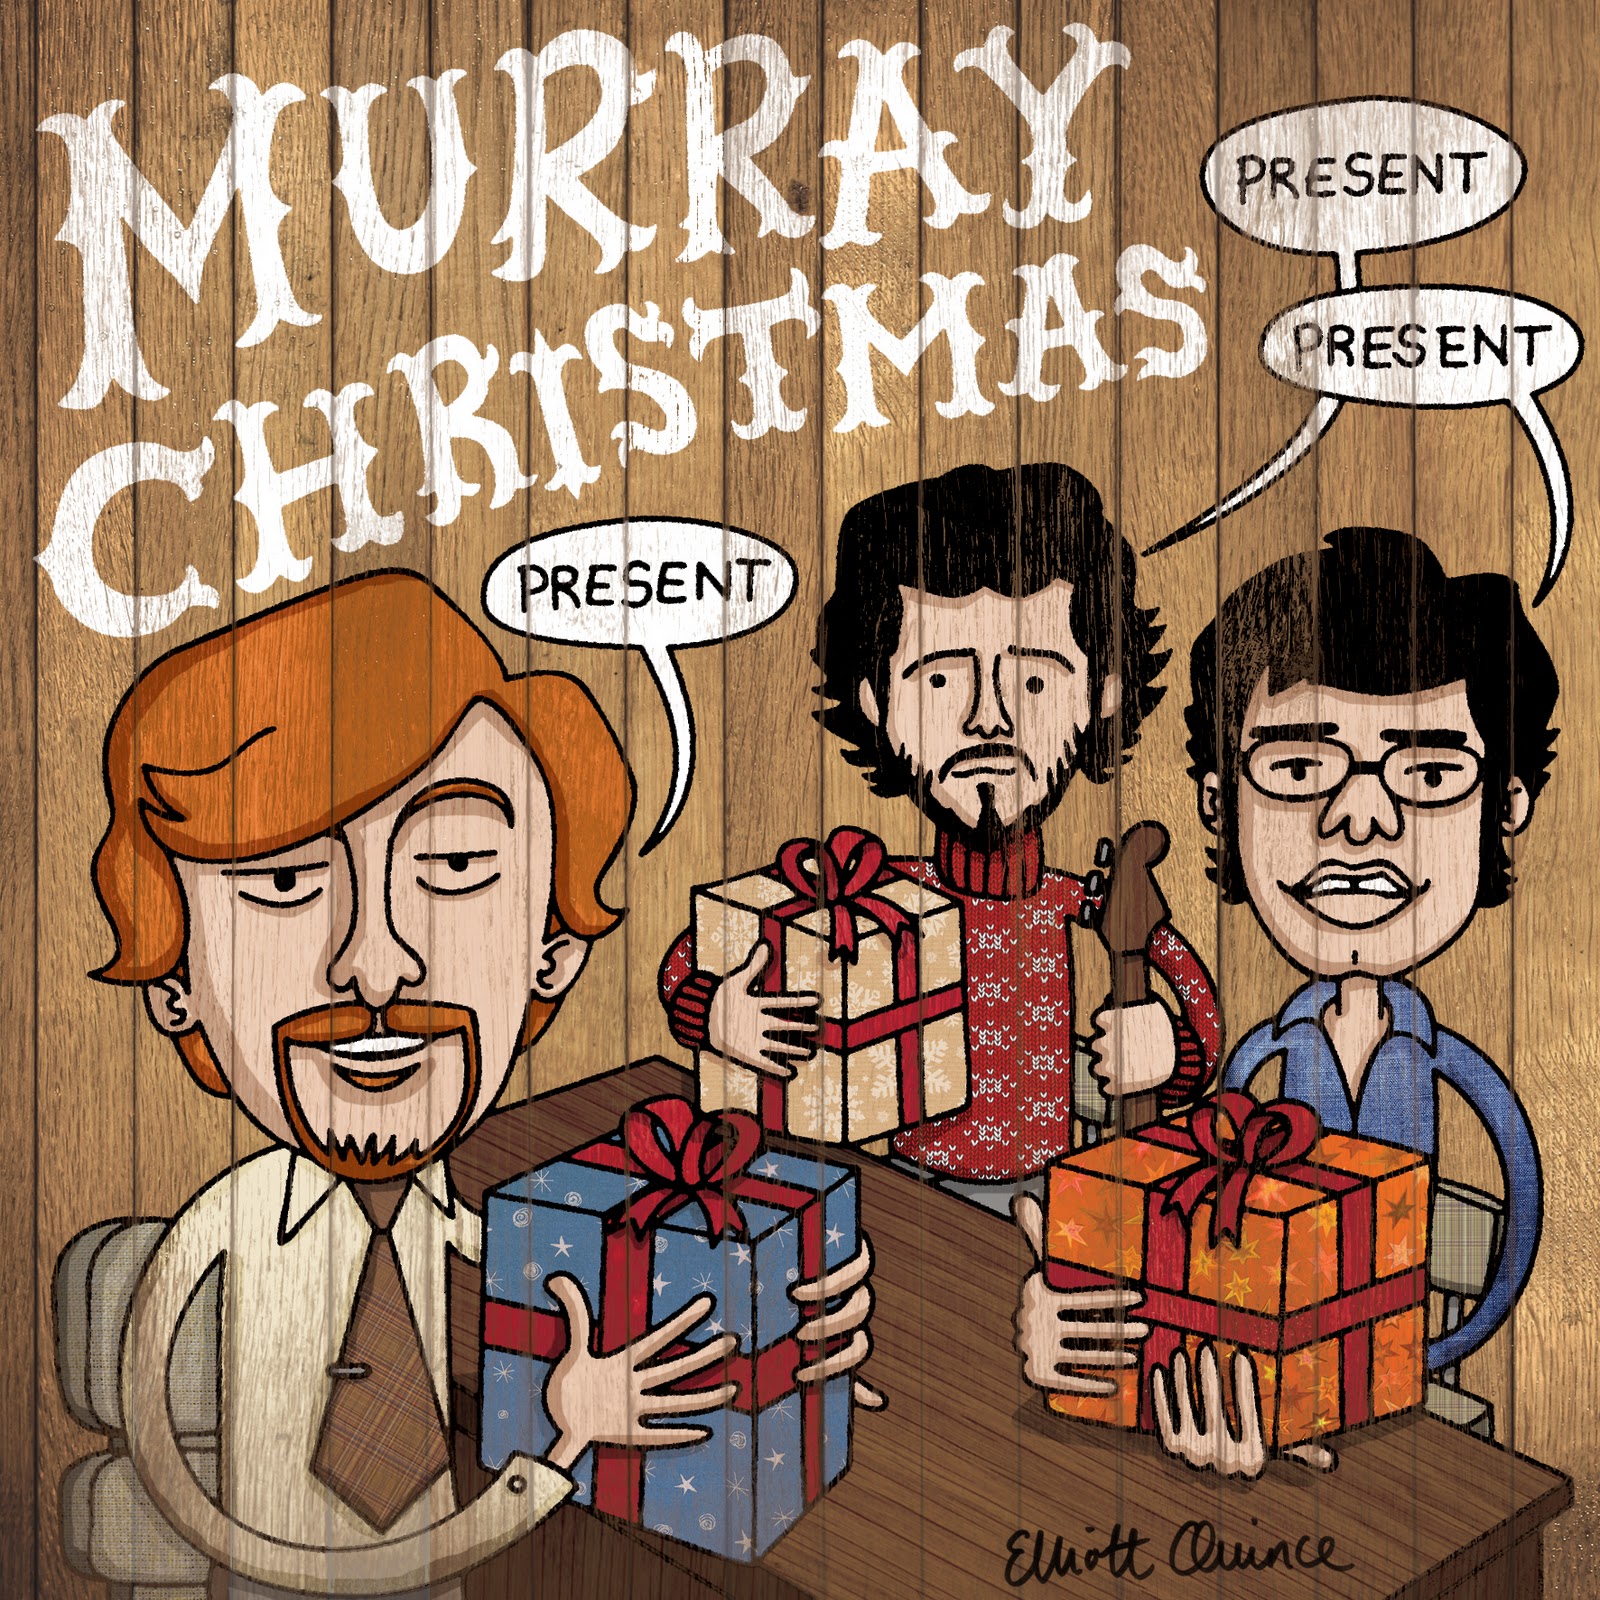 Flight Of The Conchords #6